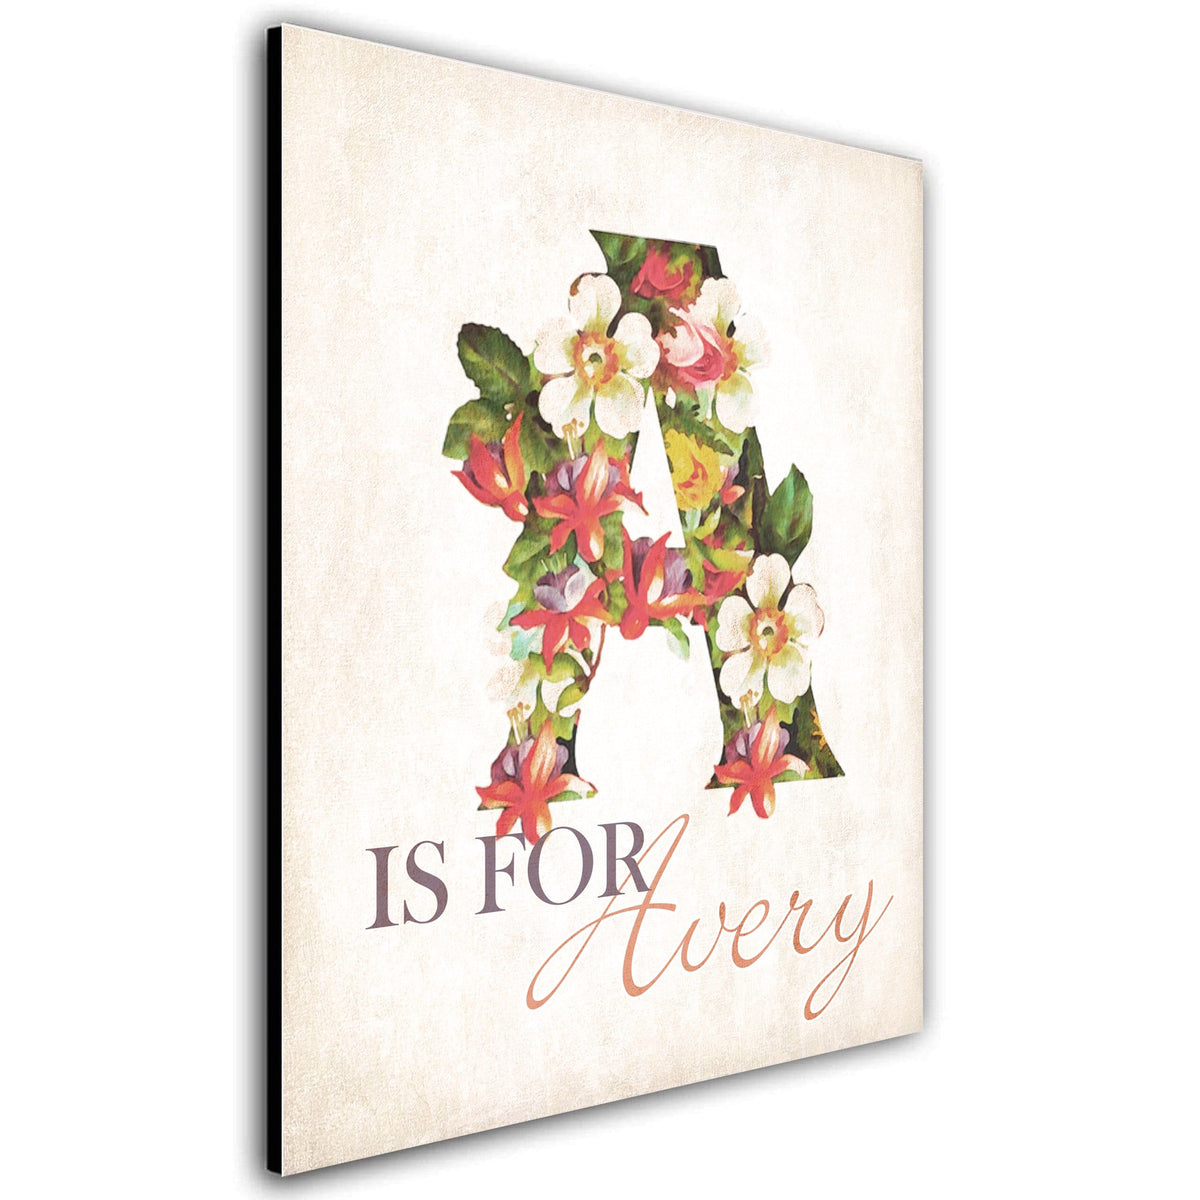 Personalized flower monogram artwork from Personal Prints